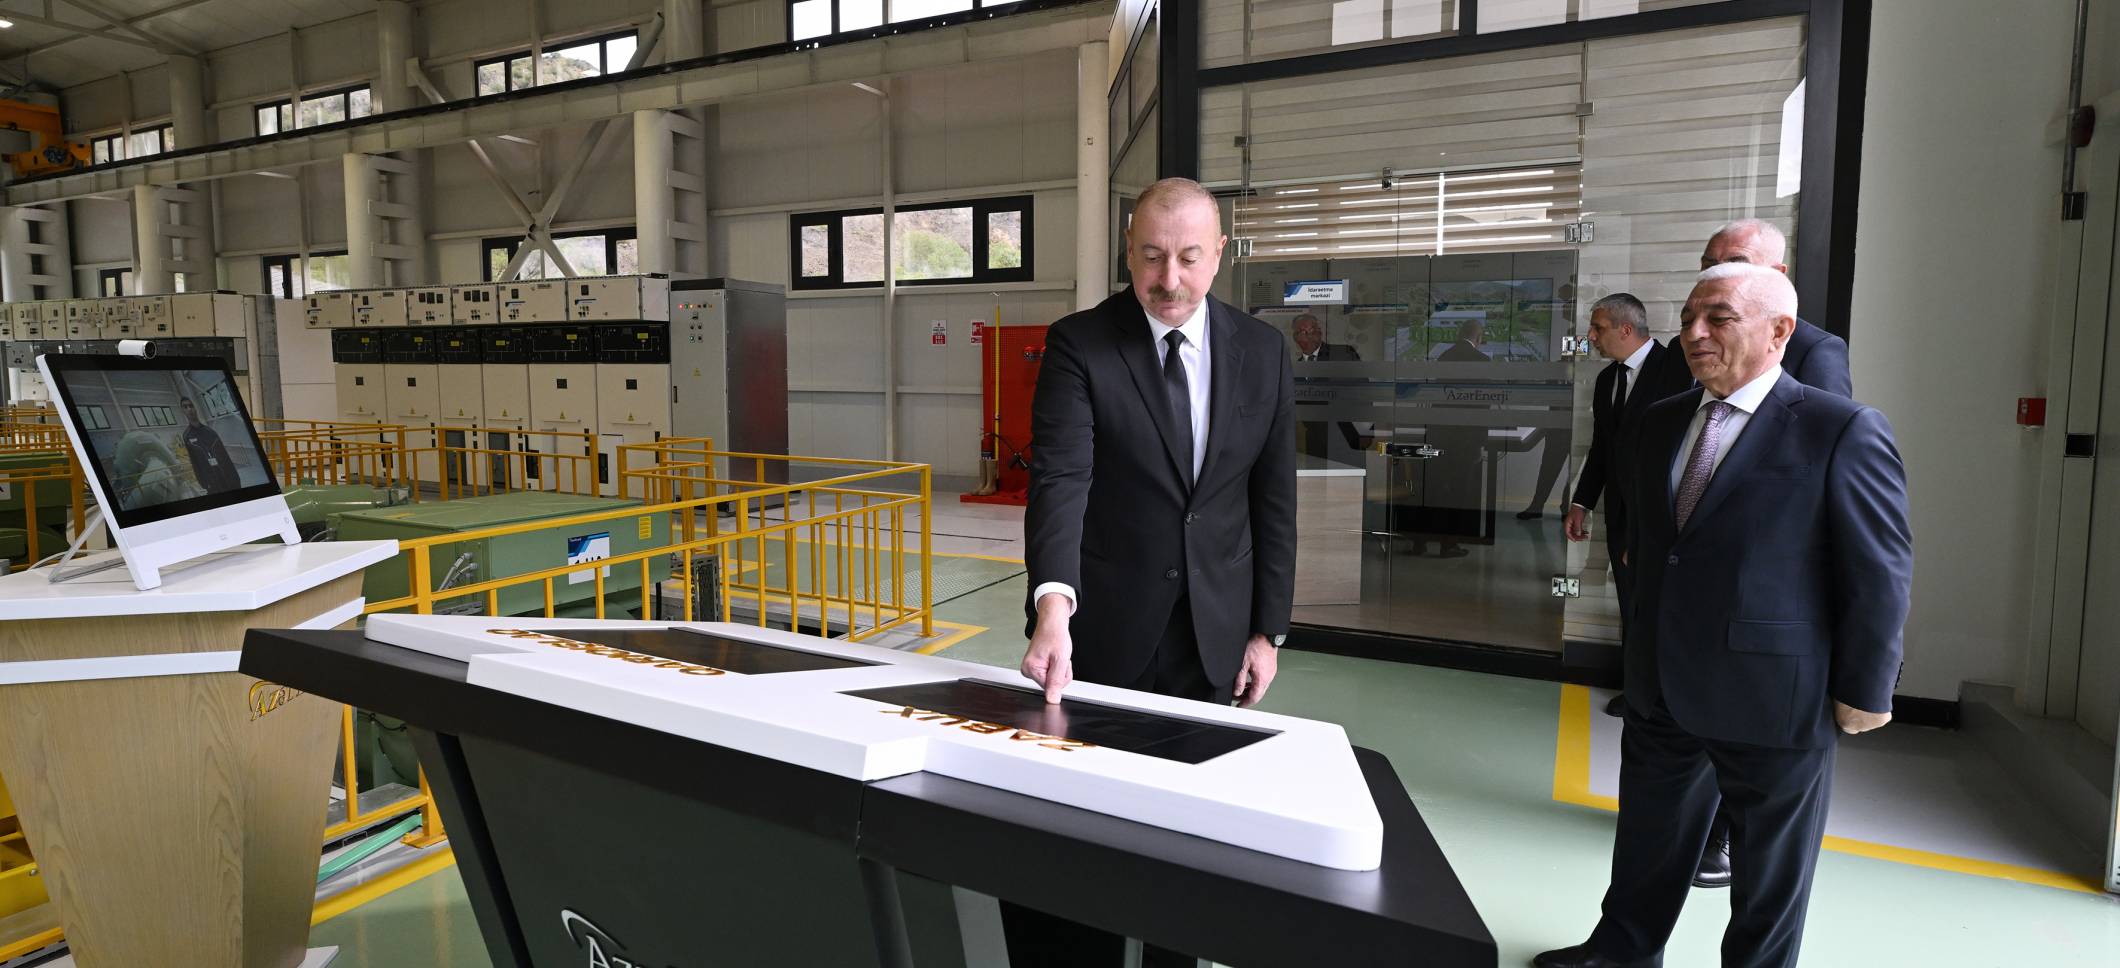 Ilham Aliyev participated in inauguration of small hydropower stations